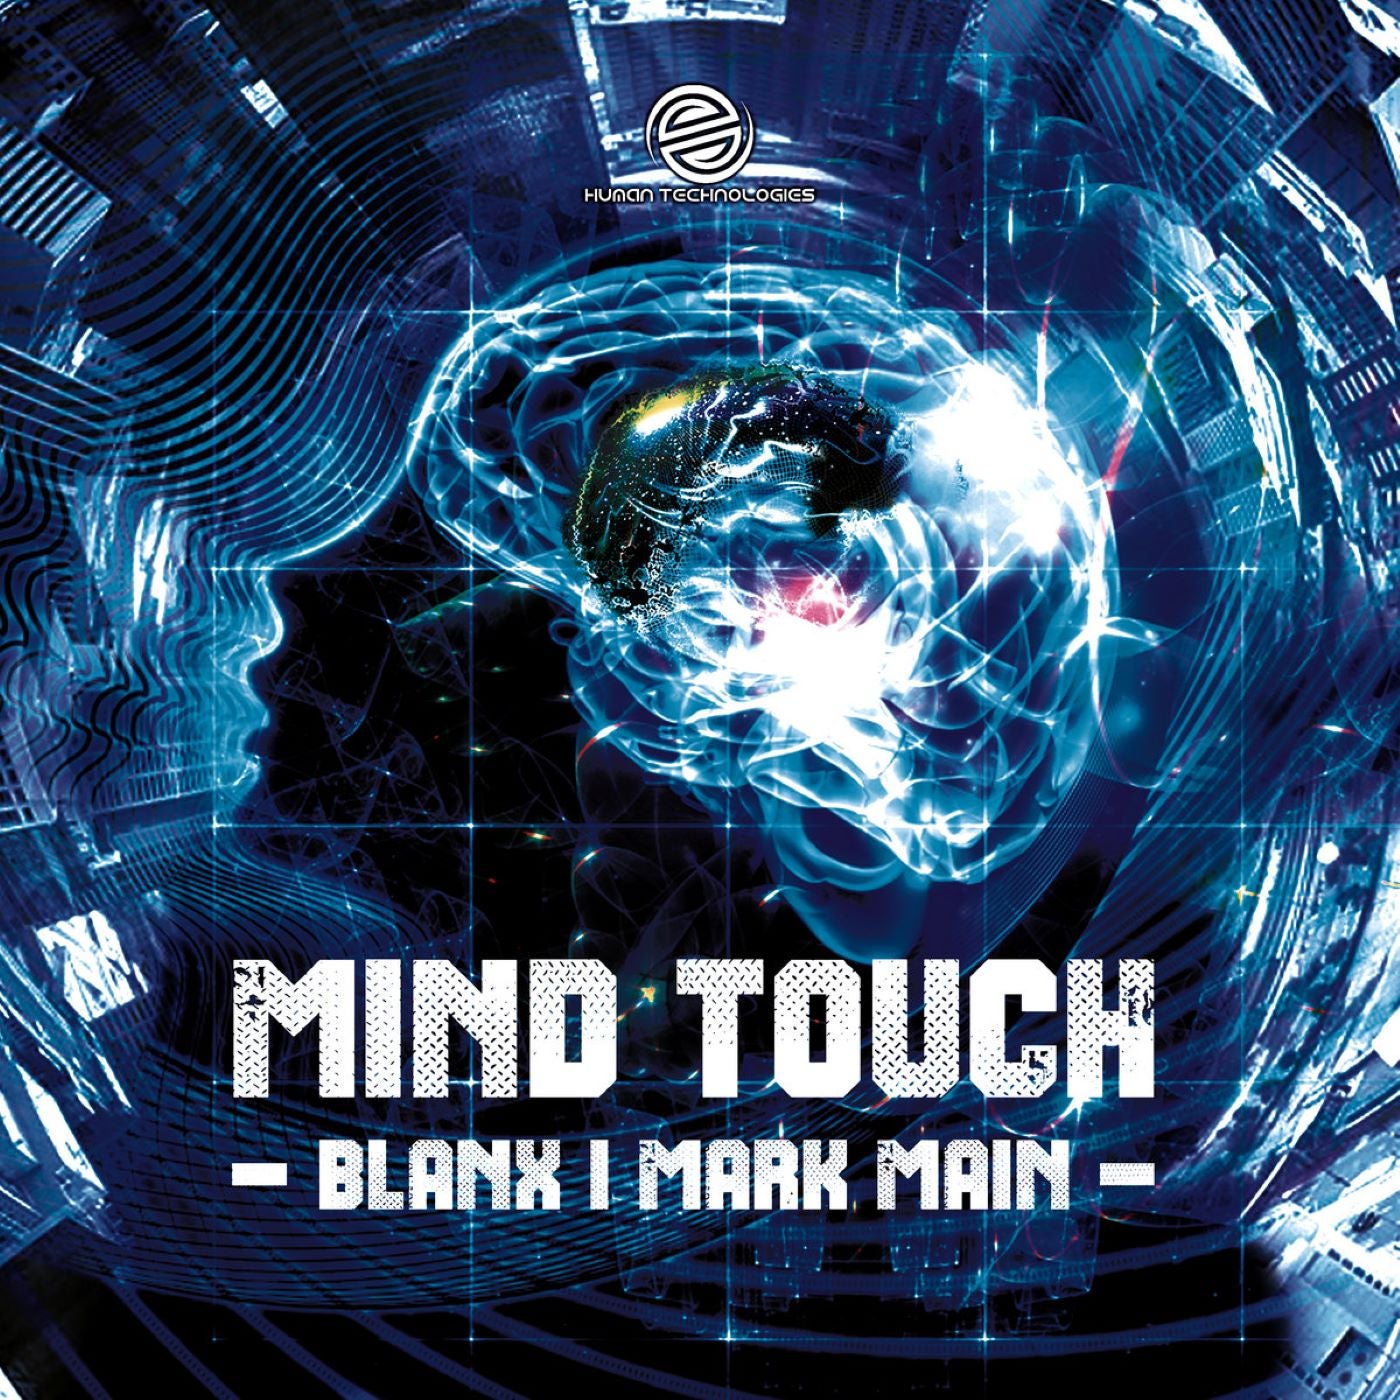 Mind Touch